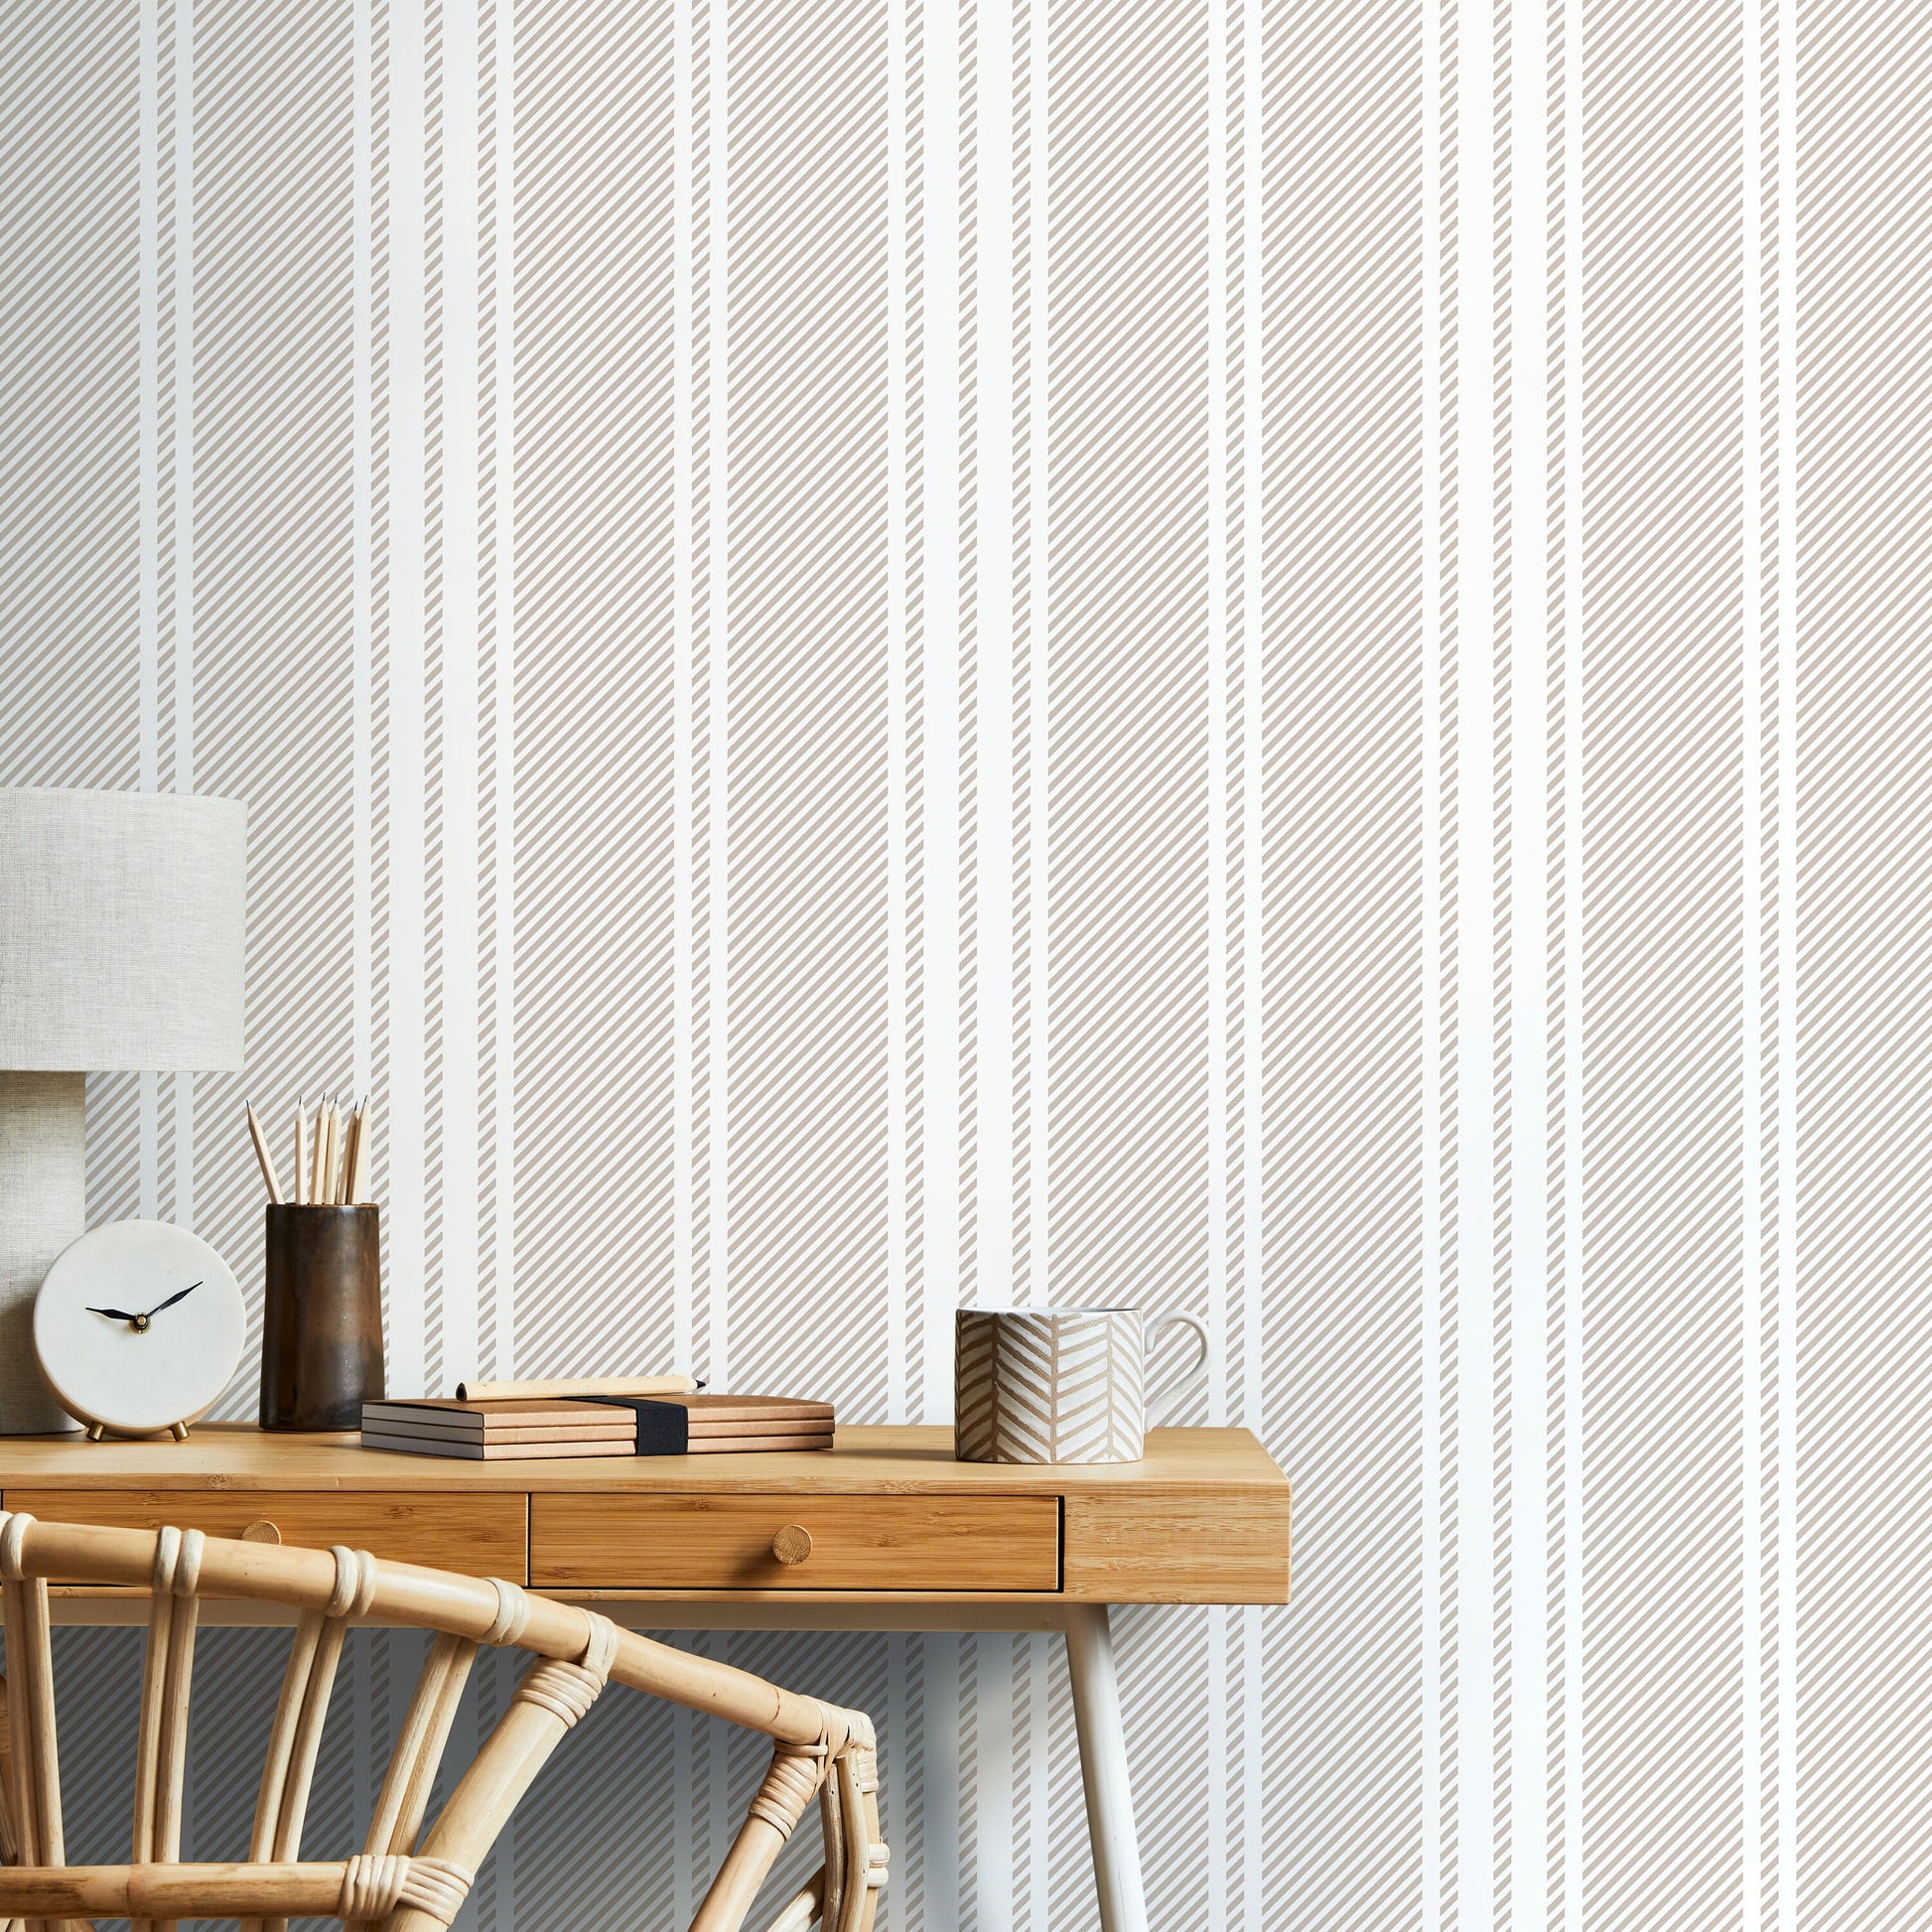 Neutral Striped Wallpaper Farmhouse Wallpaper Peel and Stick and Traditional Wallpaper - D782